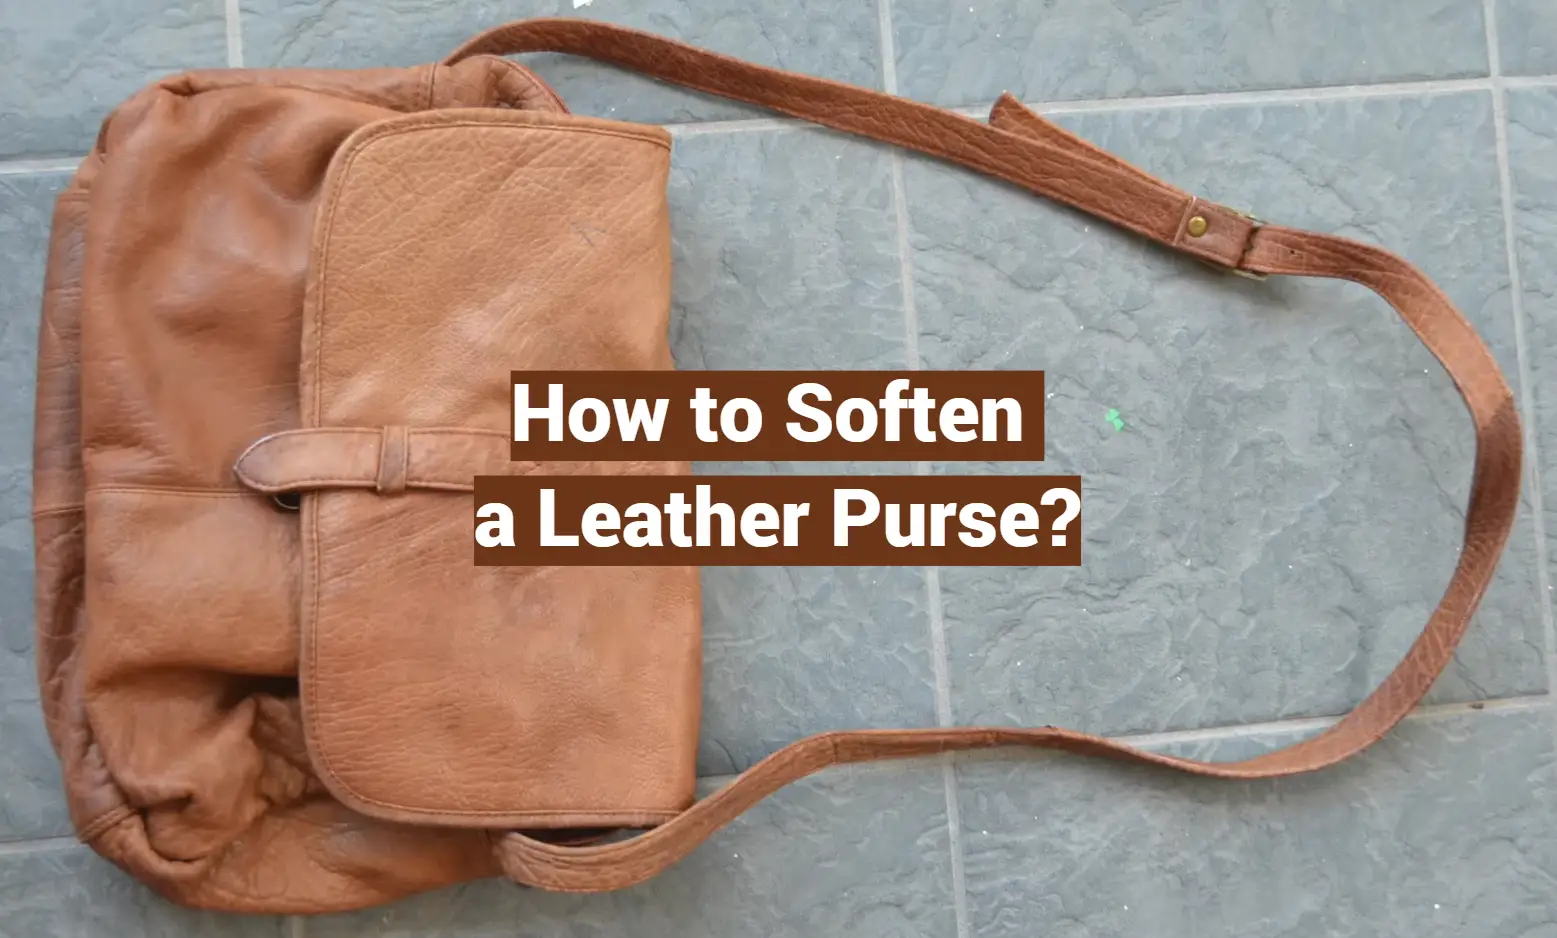 How to Soften a Leather Purse?